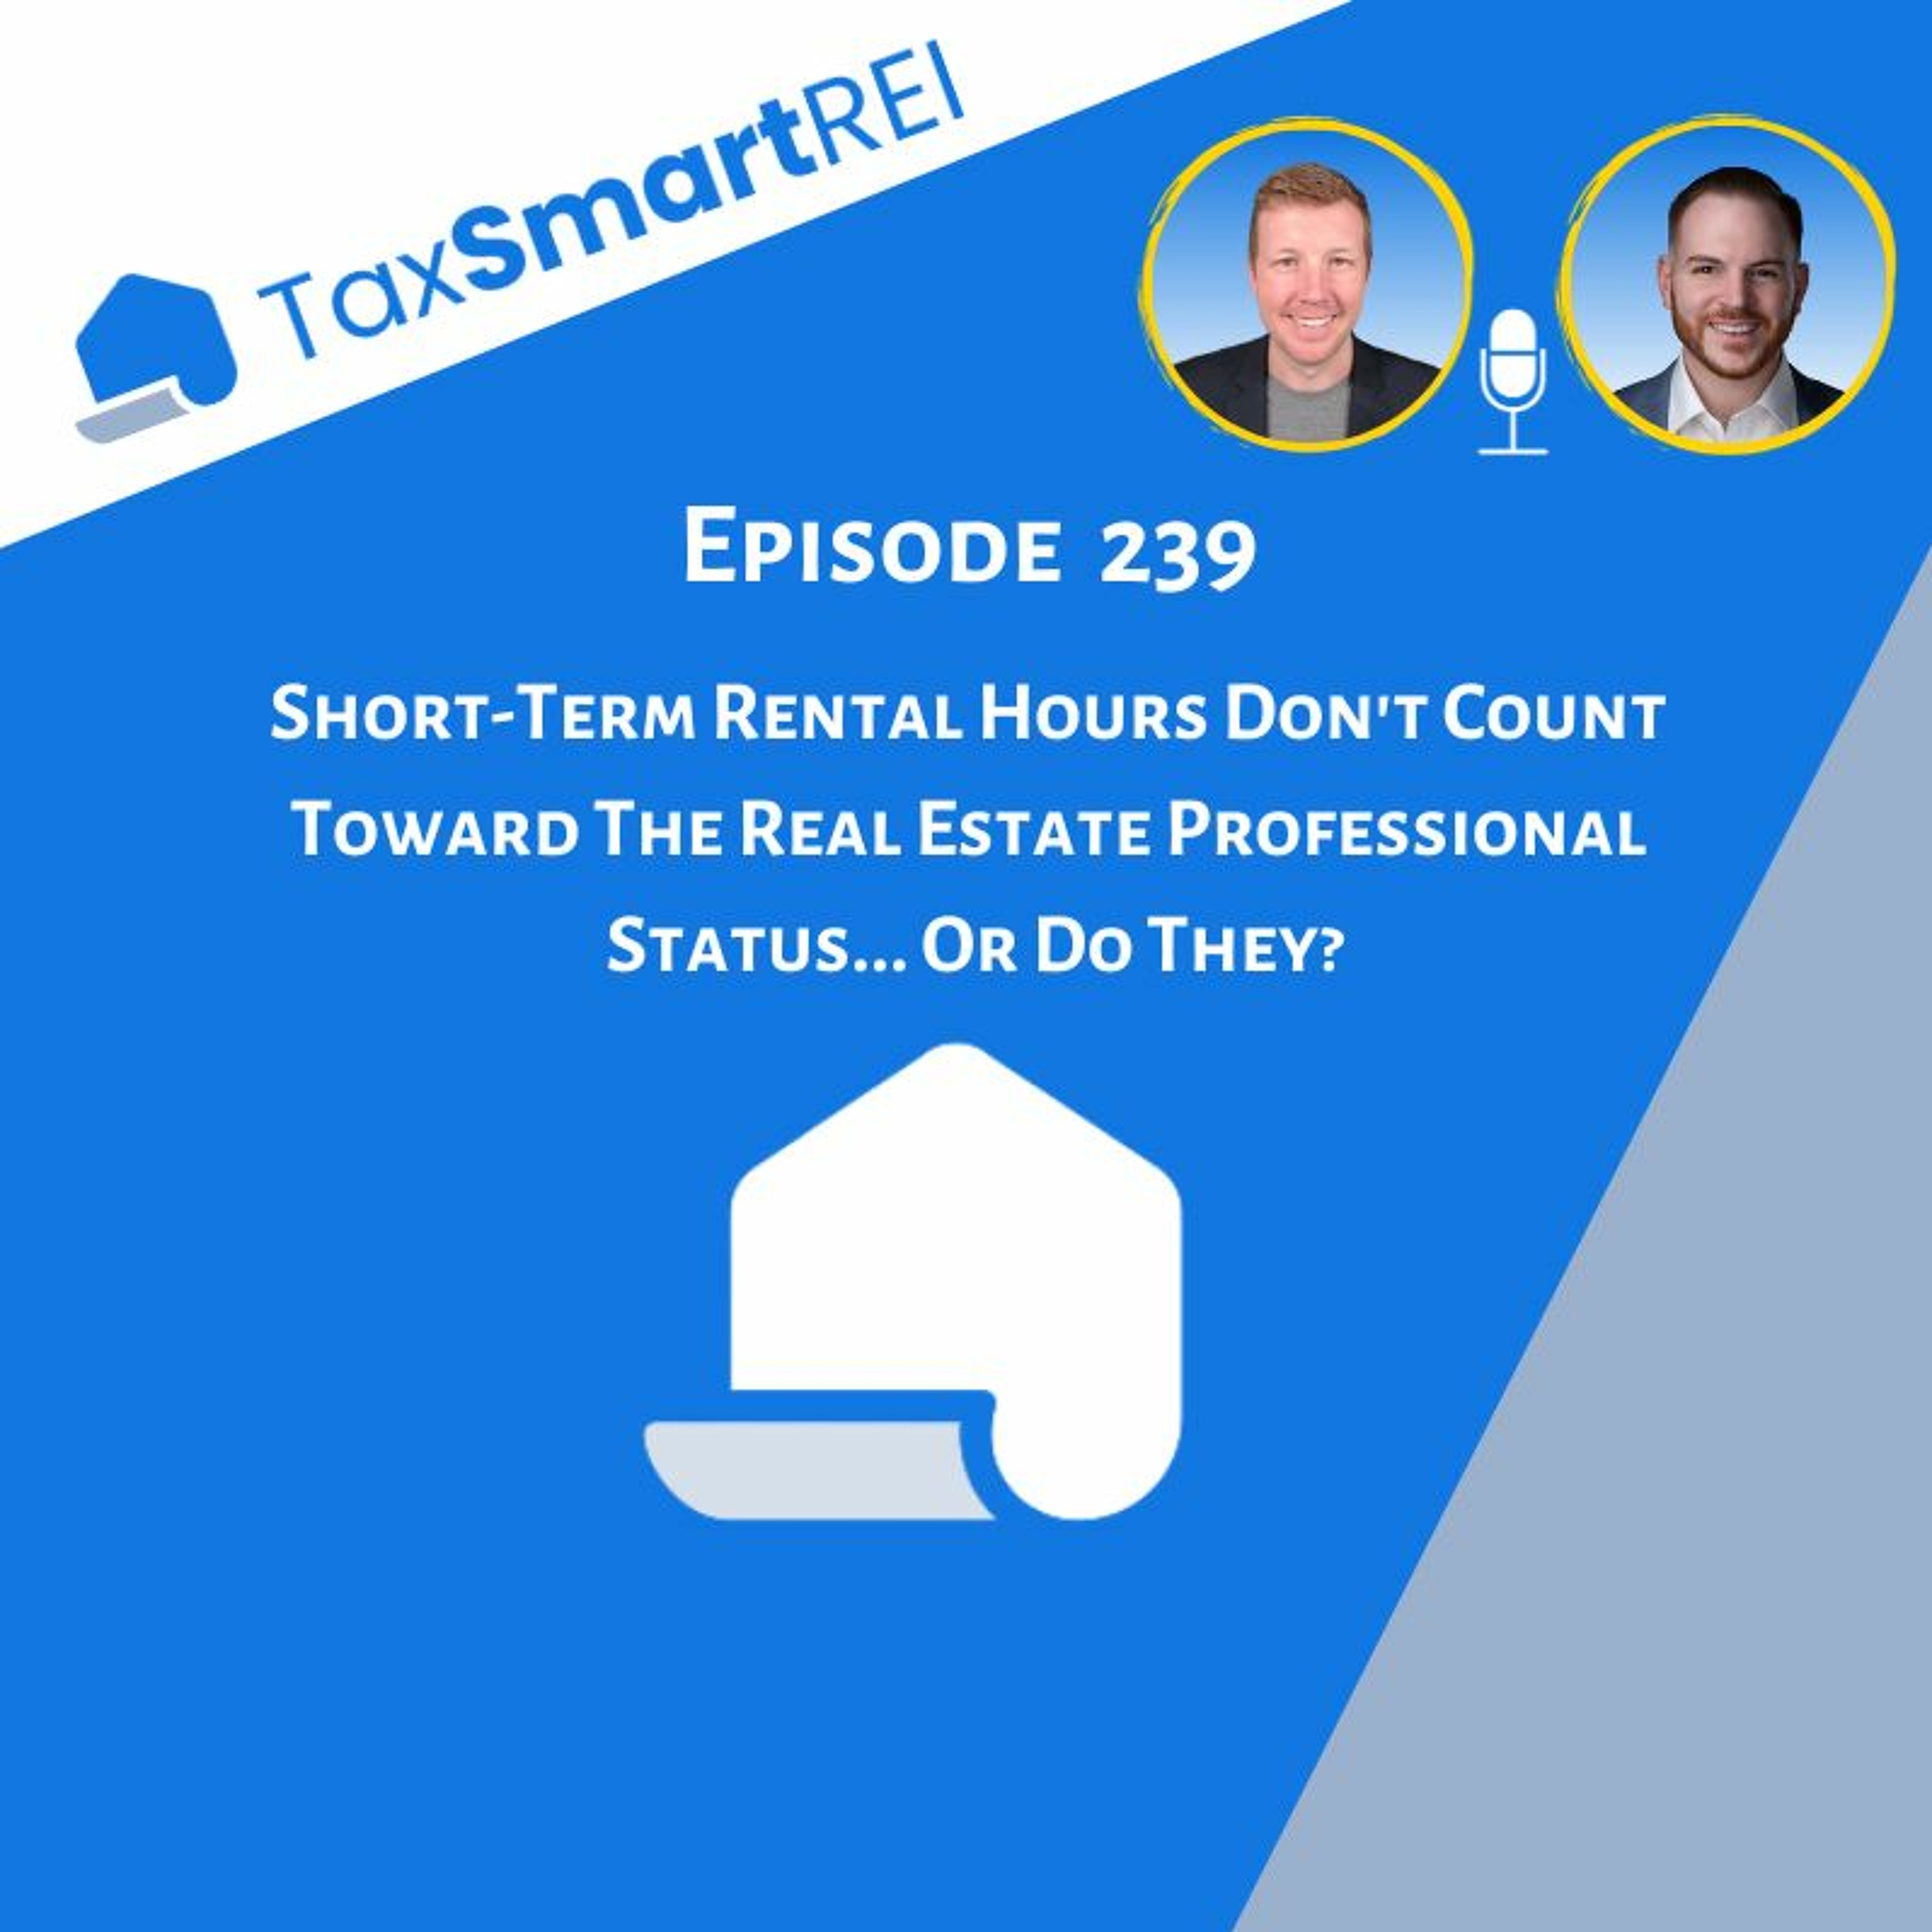 239. Short-Term Rental Hours Don’t Count Toward The Real Estate Professional Status... Or Do They?